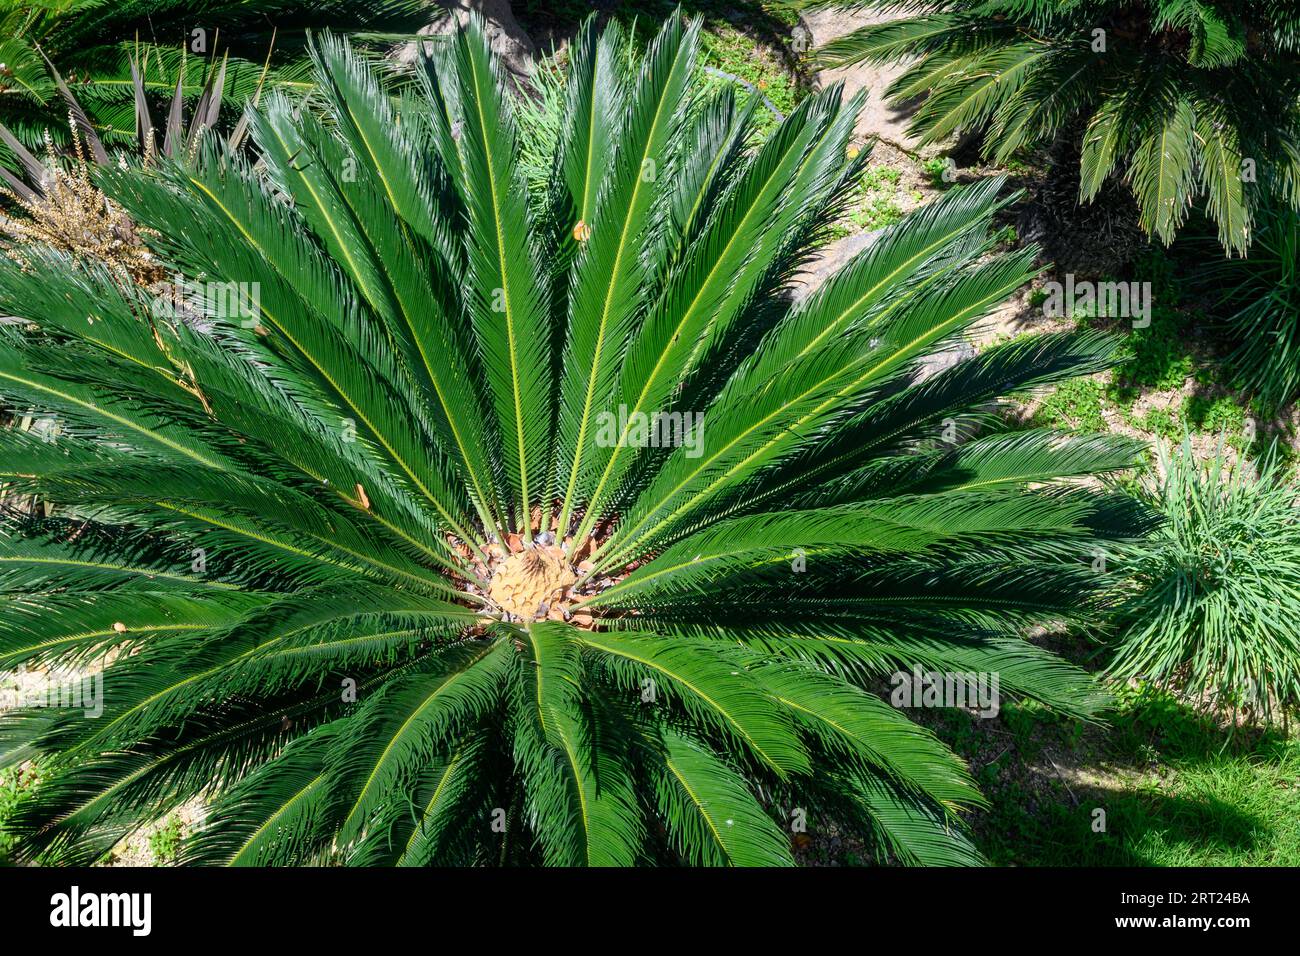 Cycas Revoluta or the Sago Palm. Evergreen plant from the cycad family Stock Photo